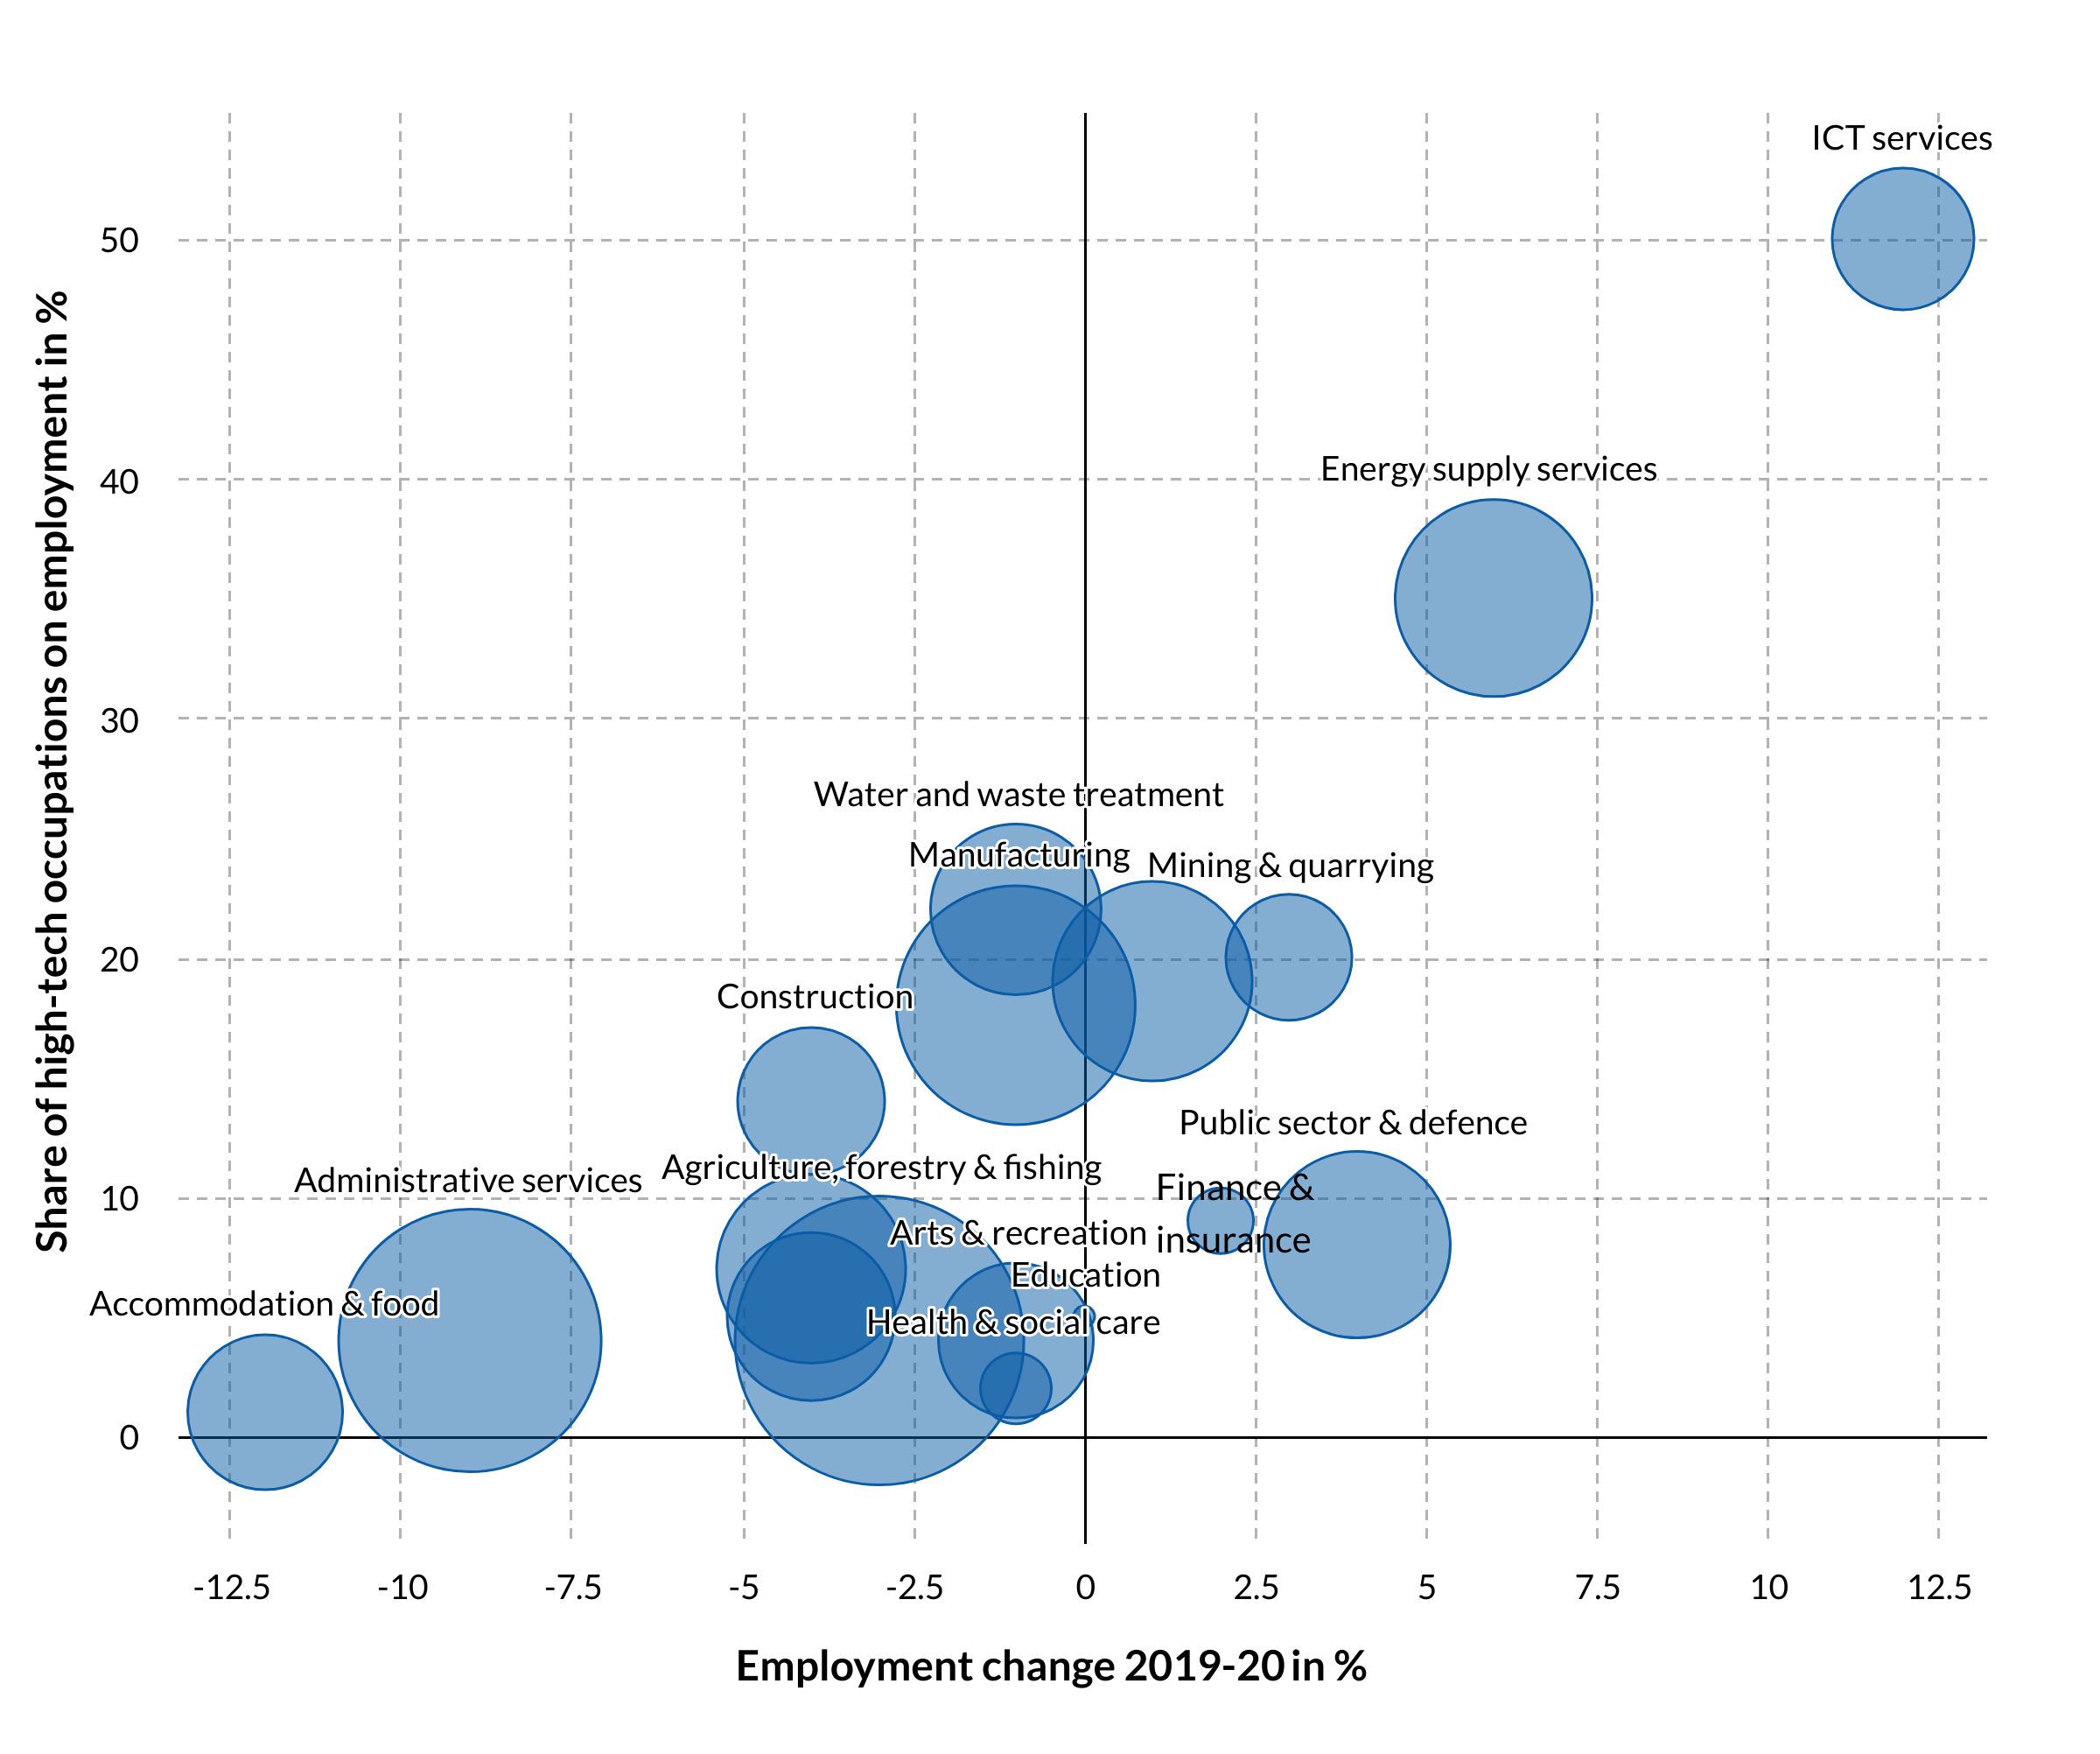 Technological advancement and employment change by sector